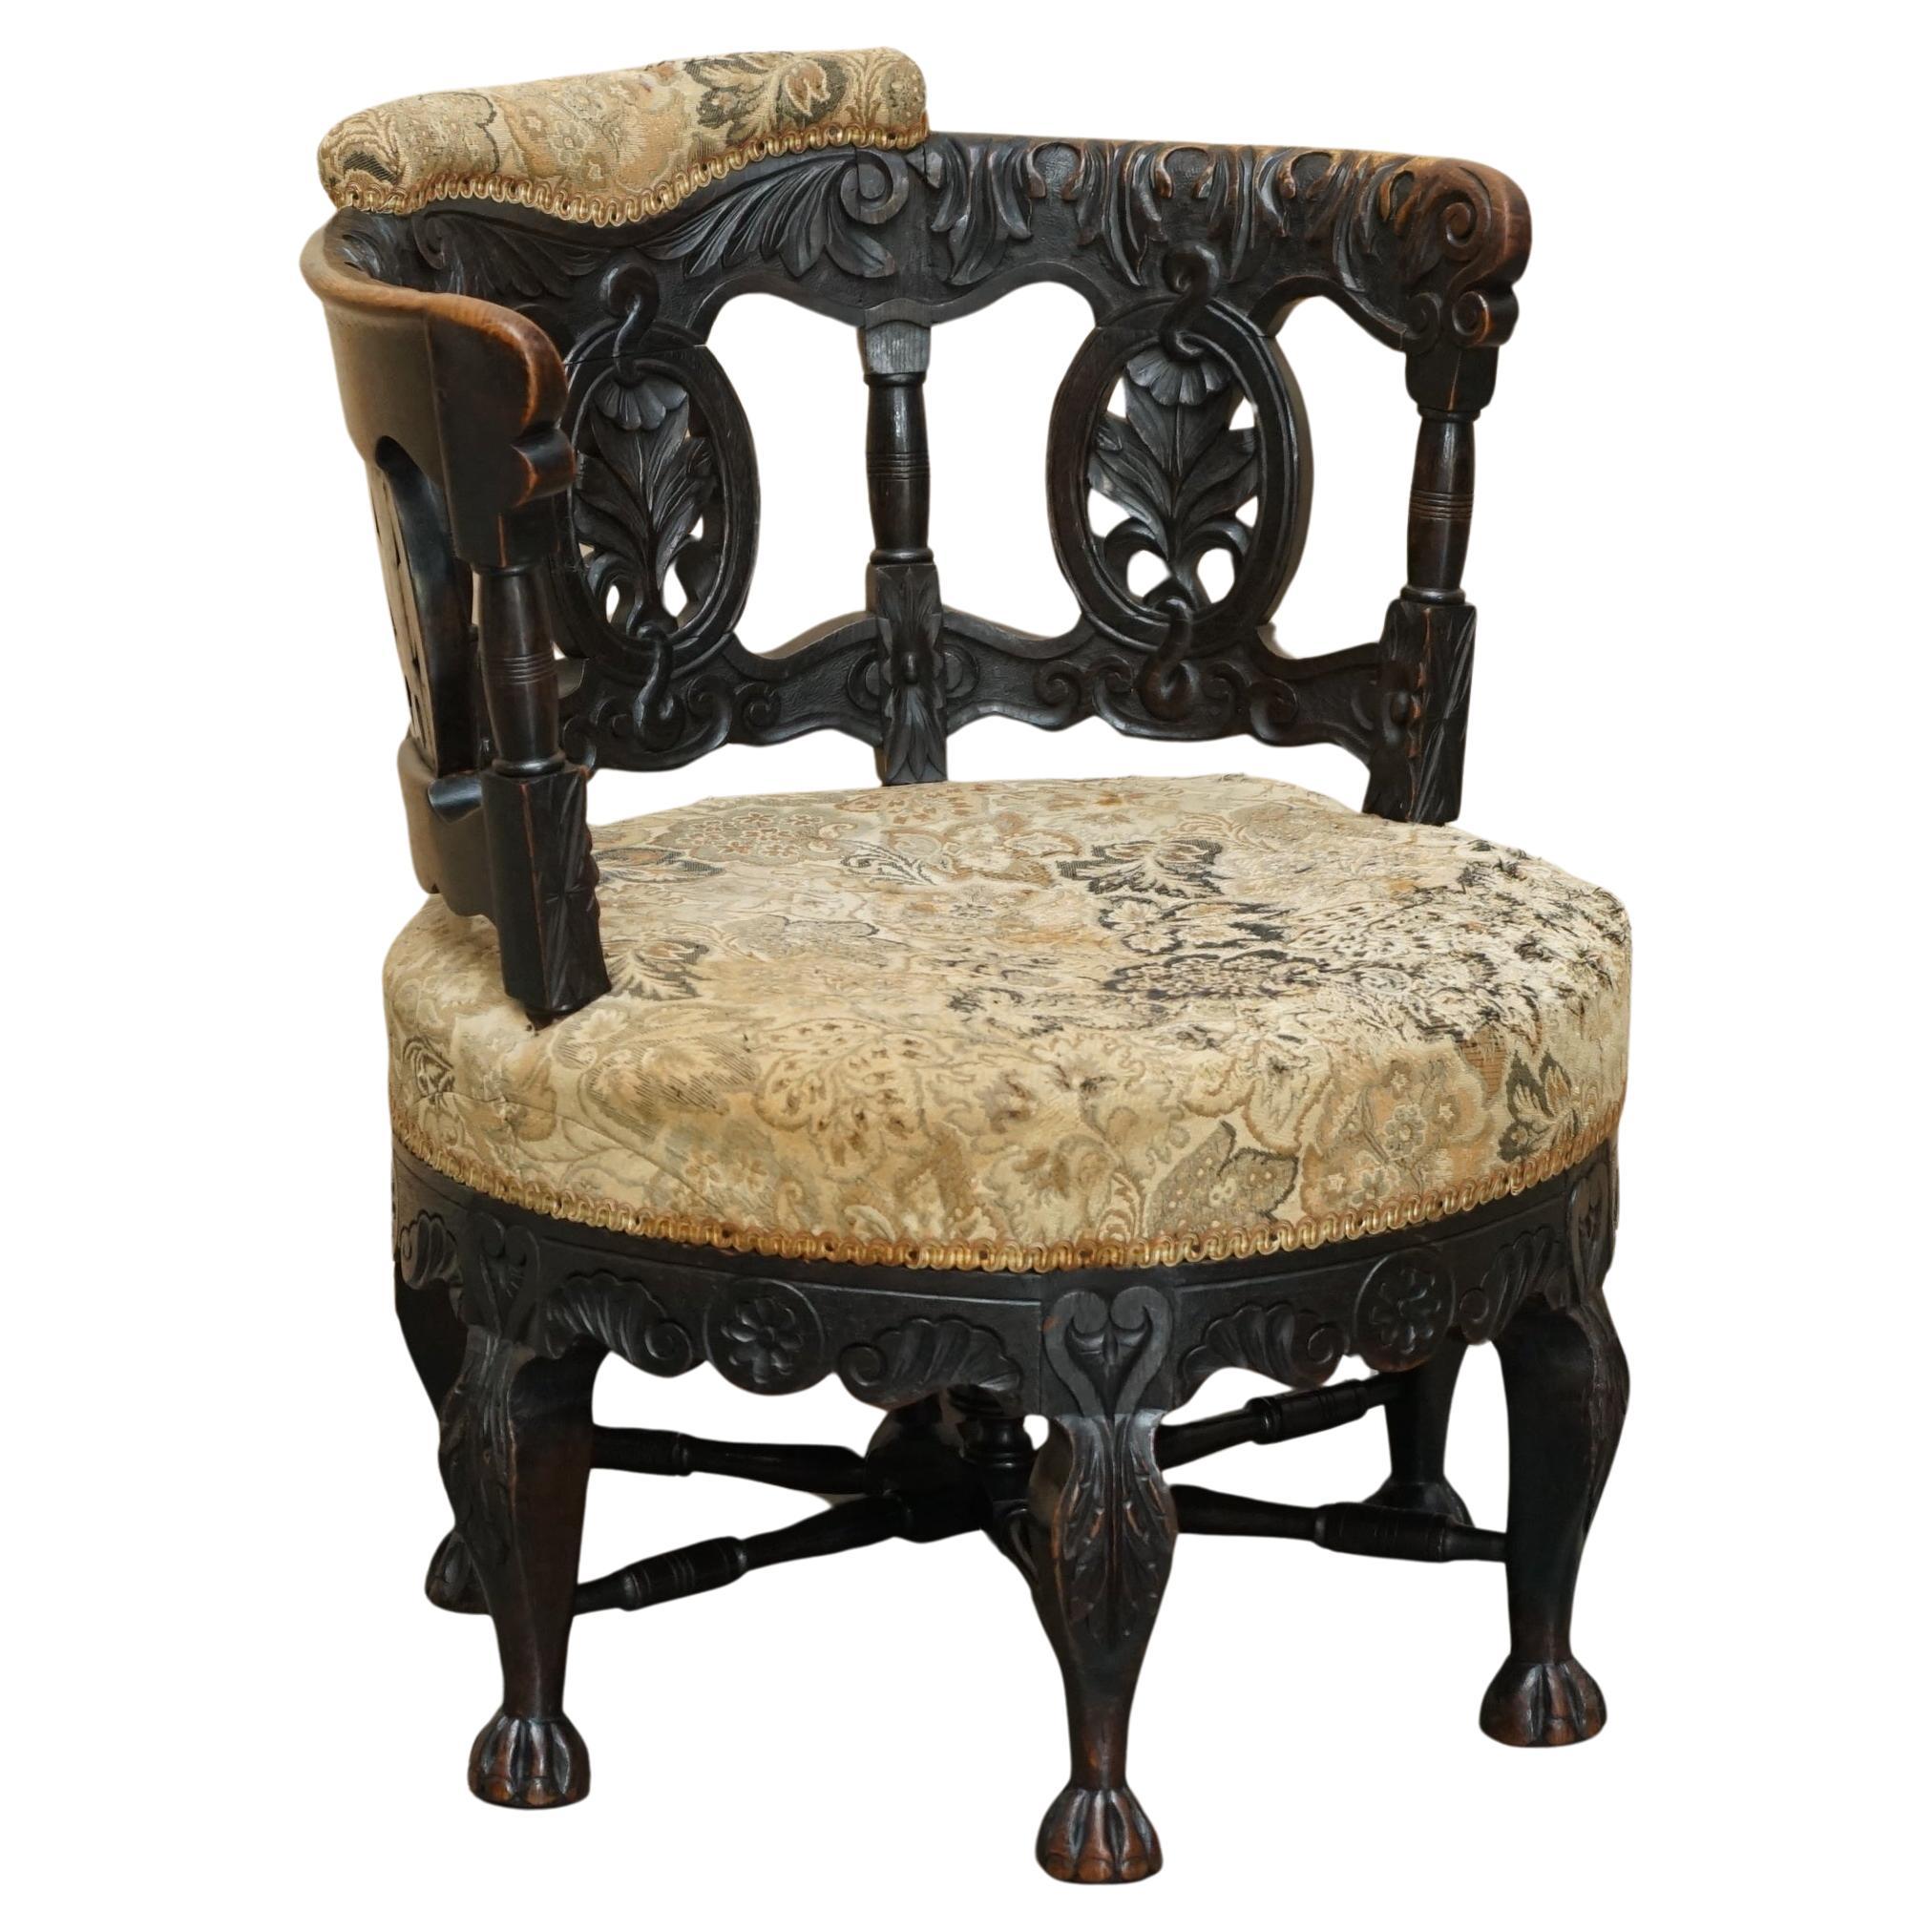 Royal House Antiques

Royal House Antiques is delighted to offer for sale highly decorative and exquisitely made Antique Victorian circa 1870 Burgermeister chair based on a 17th Jacobean design

Please note the delivery fee listed is just a guide,